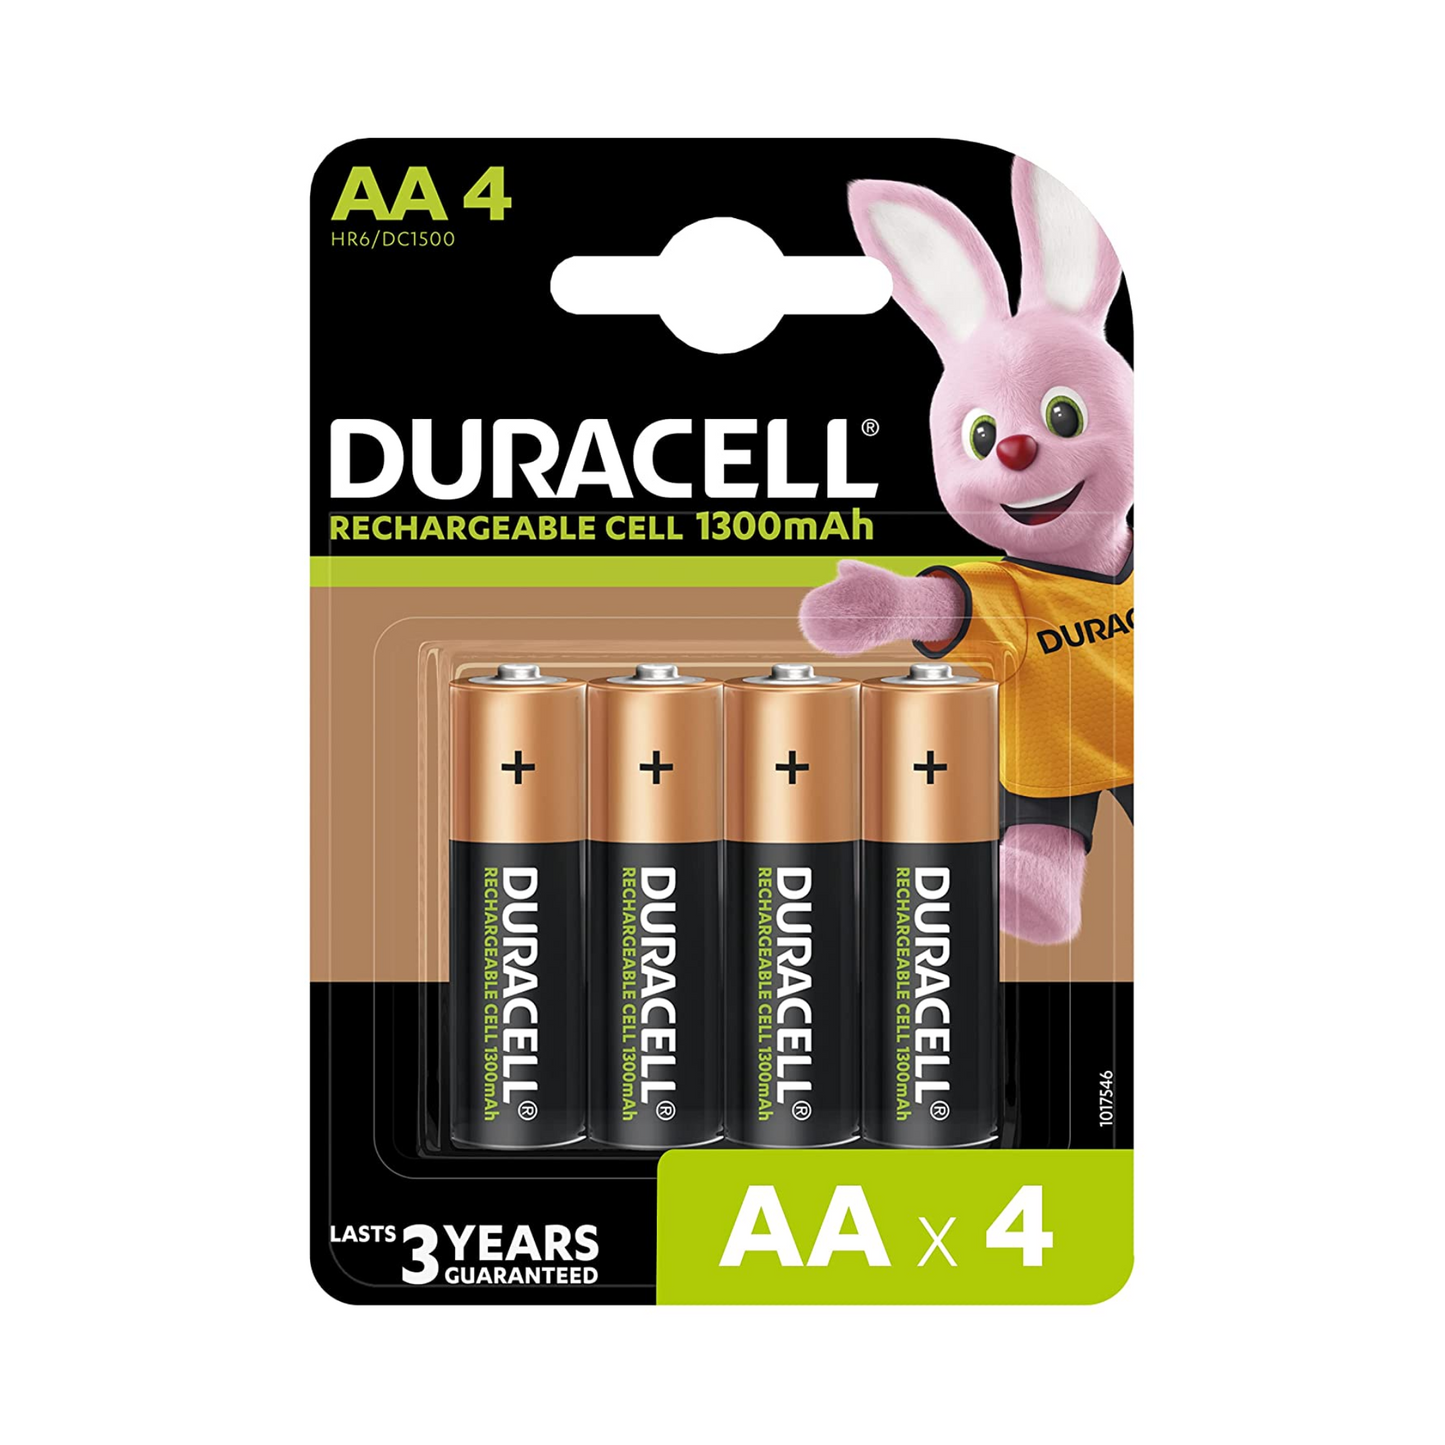 Duracell AA Rechargeable Batteries, 1300mAh (Pack of 4)